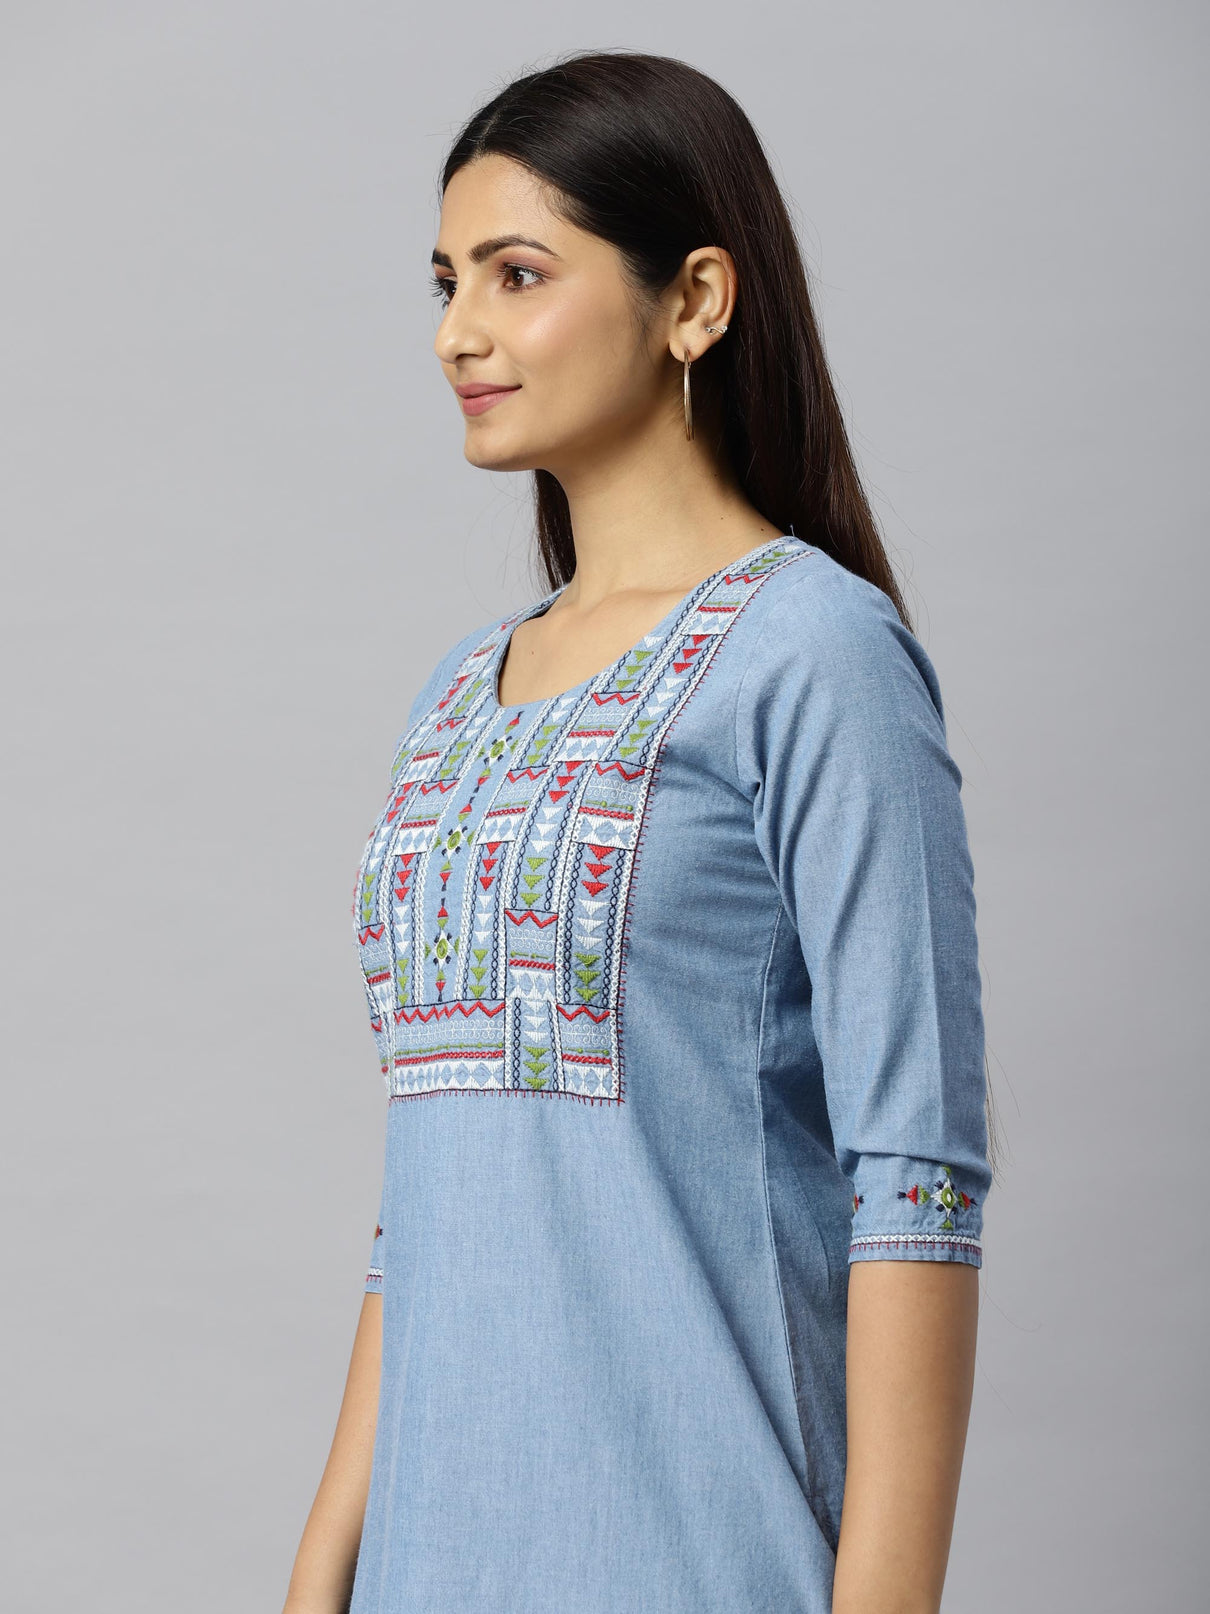 Denim indigo top with colourful thread and mirror work embroidery